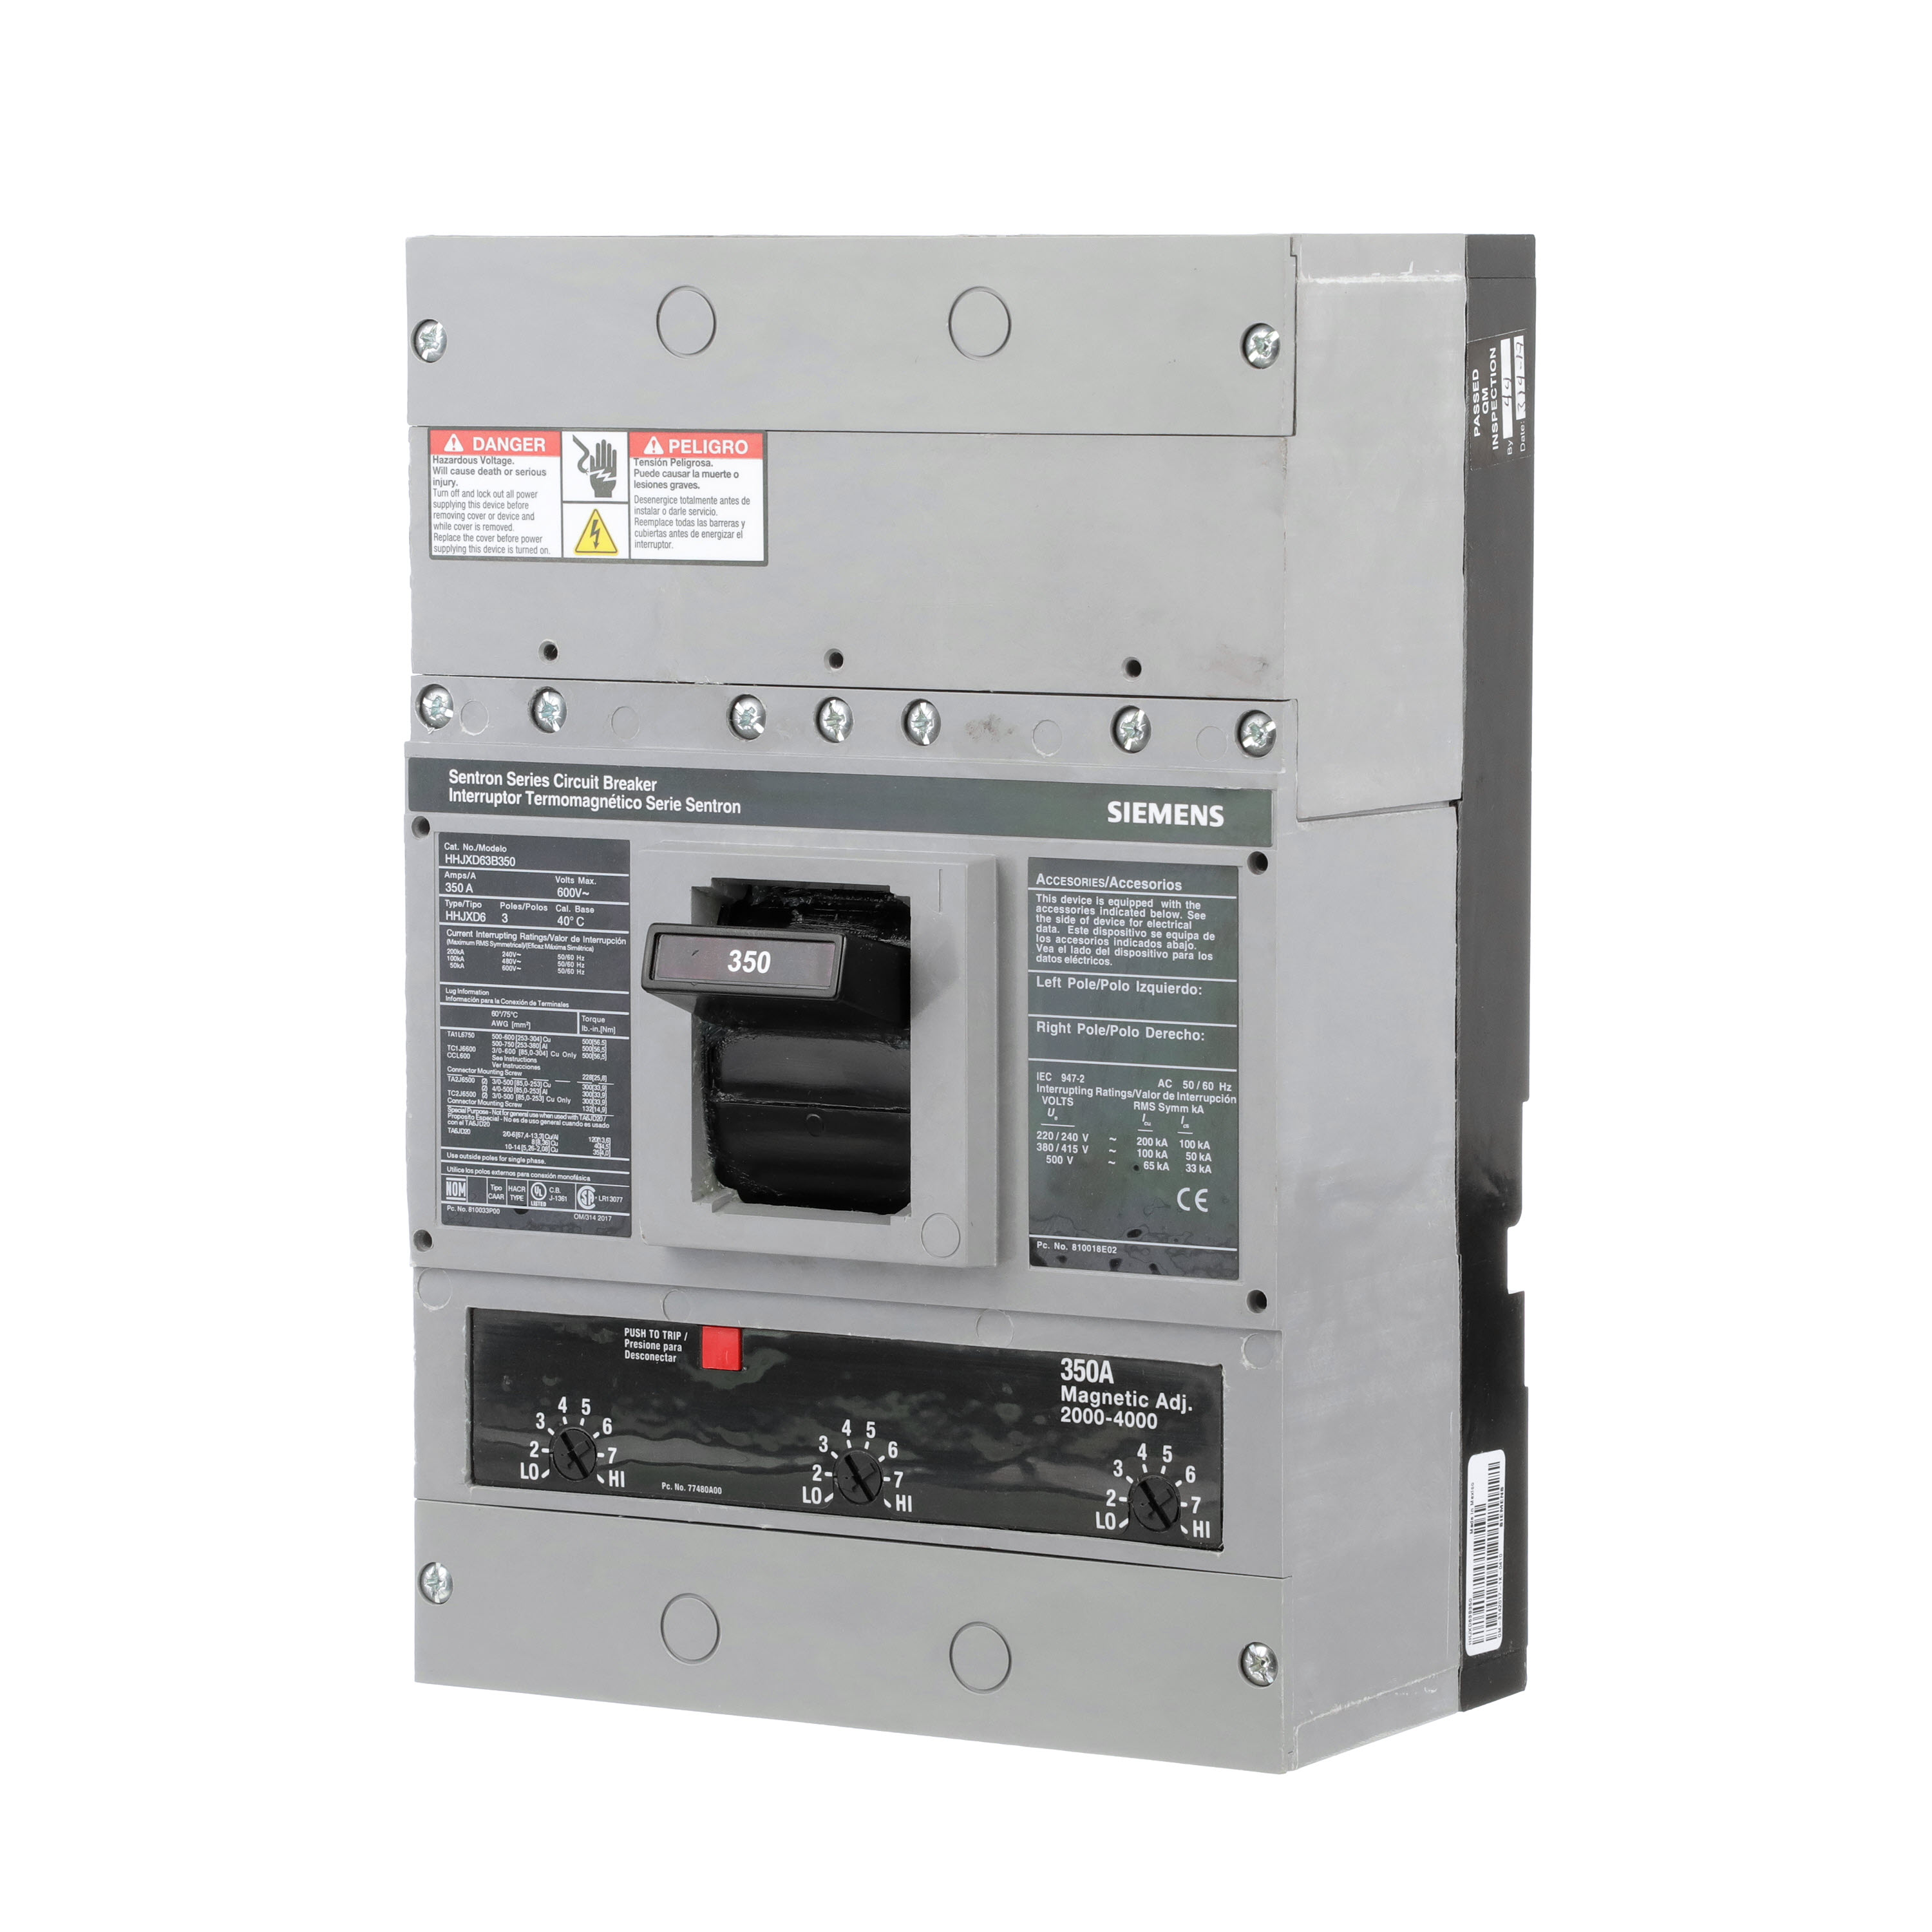 SIEMENS LOW VOLTAGE SENTRON MOLDED CASE CIRCUIT BREAKER WITH THERMAL - MAGNETICTRIP UNIT. ASSEMBLED STANDARD 40 DEG C BREAKER JD FRAME WITH EXTRA HIGH BREAKING CAPACITY. 225A 3-POLE (50KAIC AT 600V) (100KAIC AT 480V). NON-INTERCHANGEABLE TRIP UNIT. SPECIAL FEATURES NO LUGS INSTALLED. DIMENSIONS (W x H x D) IN 7.50 x 11.0 x 4.00.